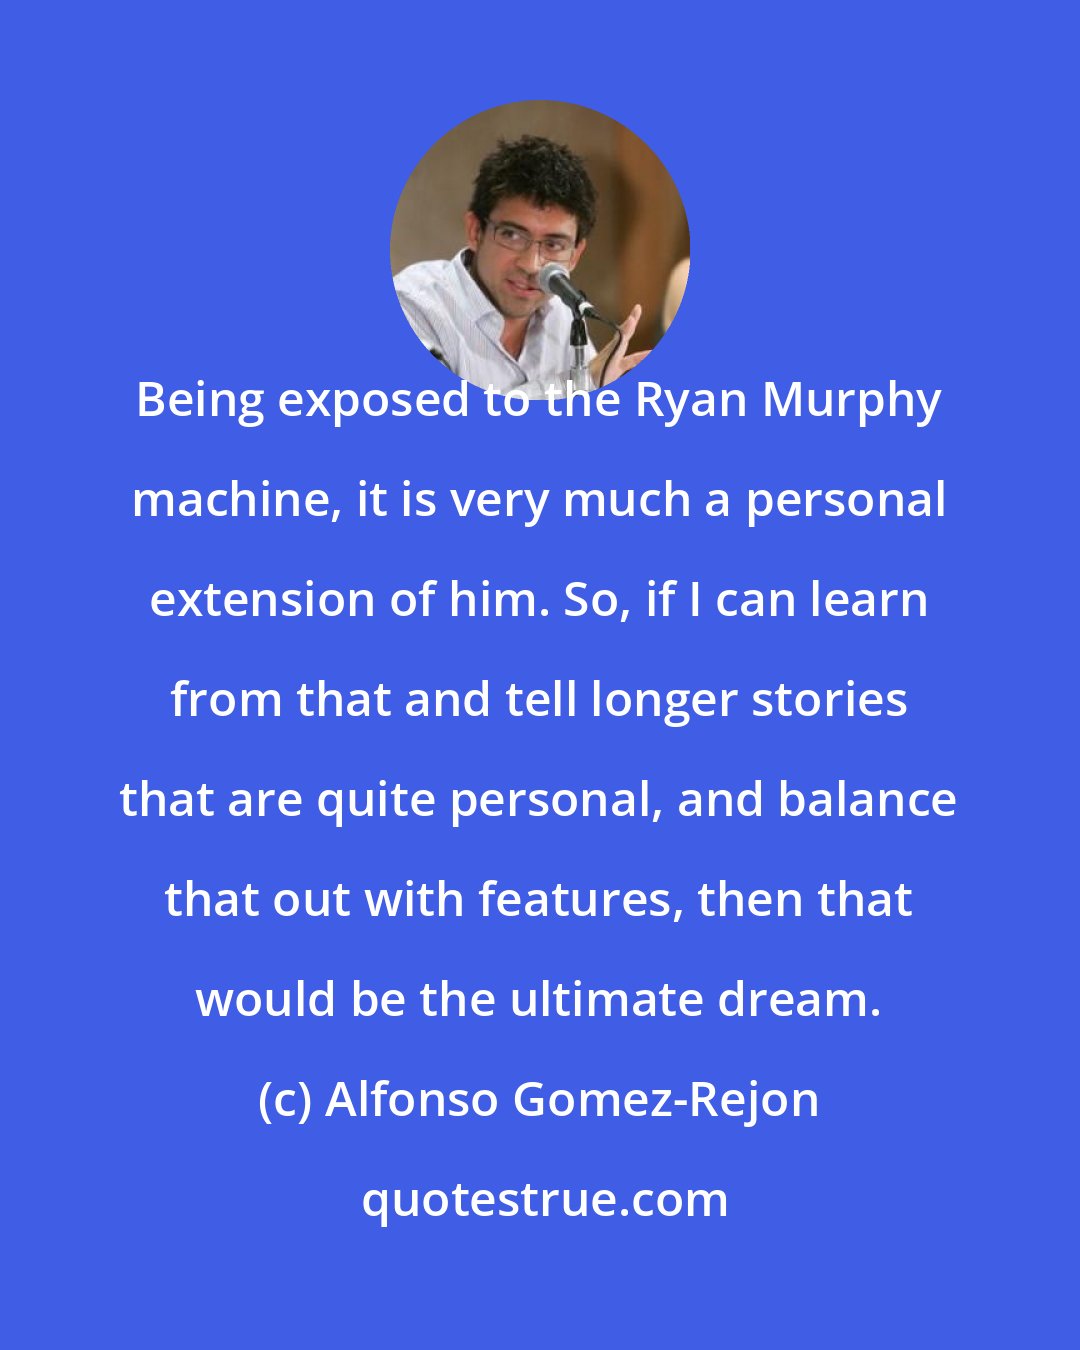 Alfonso Gomez-Rejon: Being exposed to the Ryan Murphy machine, it is very much a personal extension of him. So, if I can learn from that and tell longer stories that are quite personal, and balance that out with features, then that would be the ultimate dream.